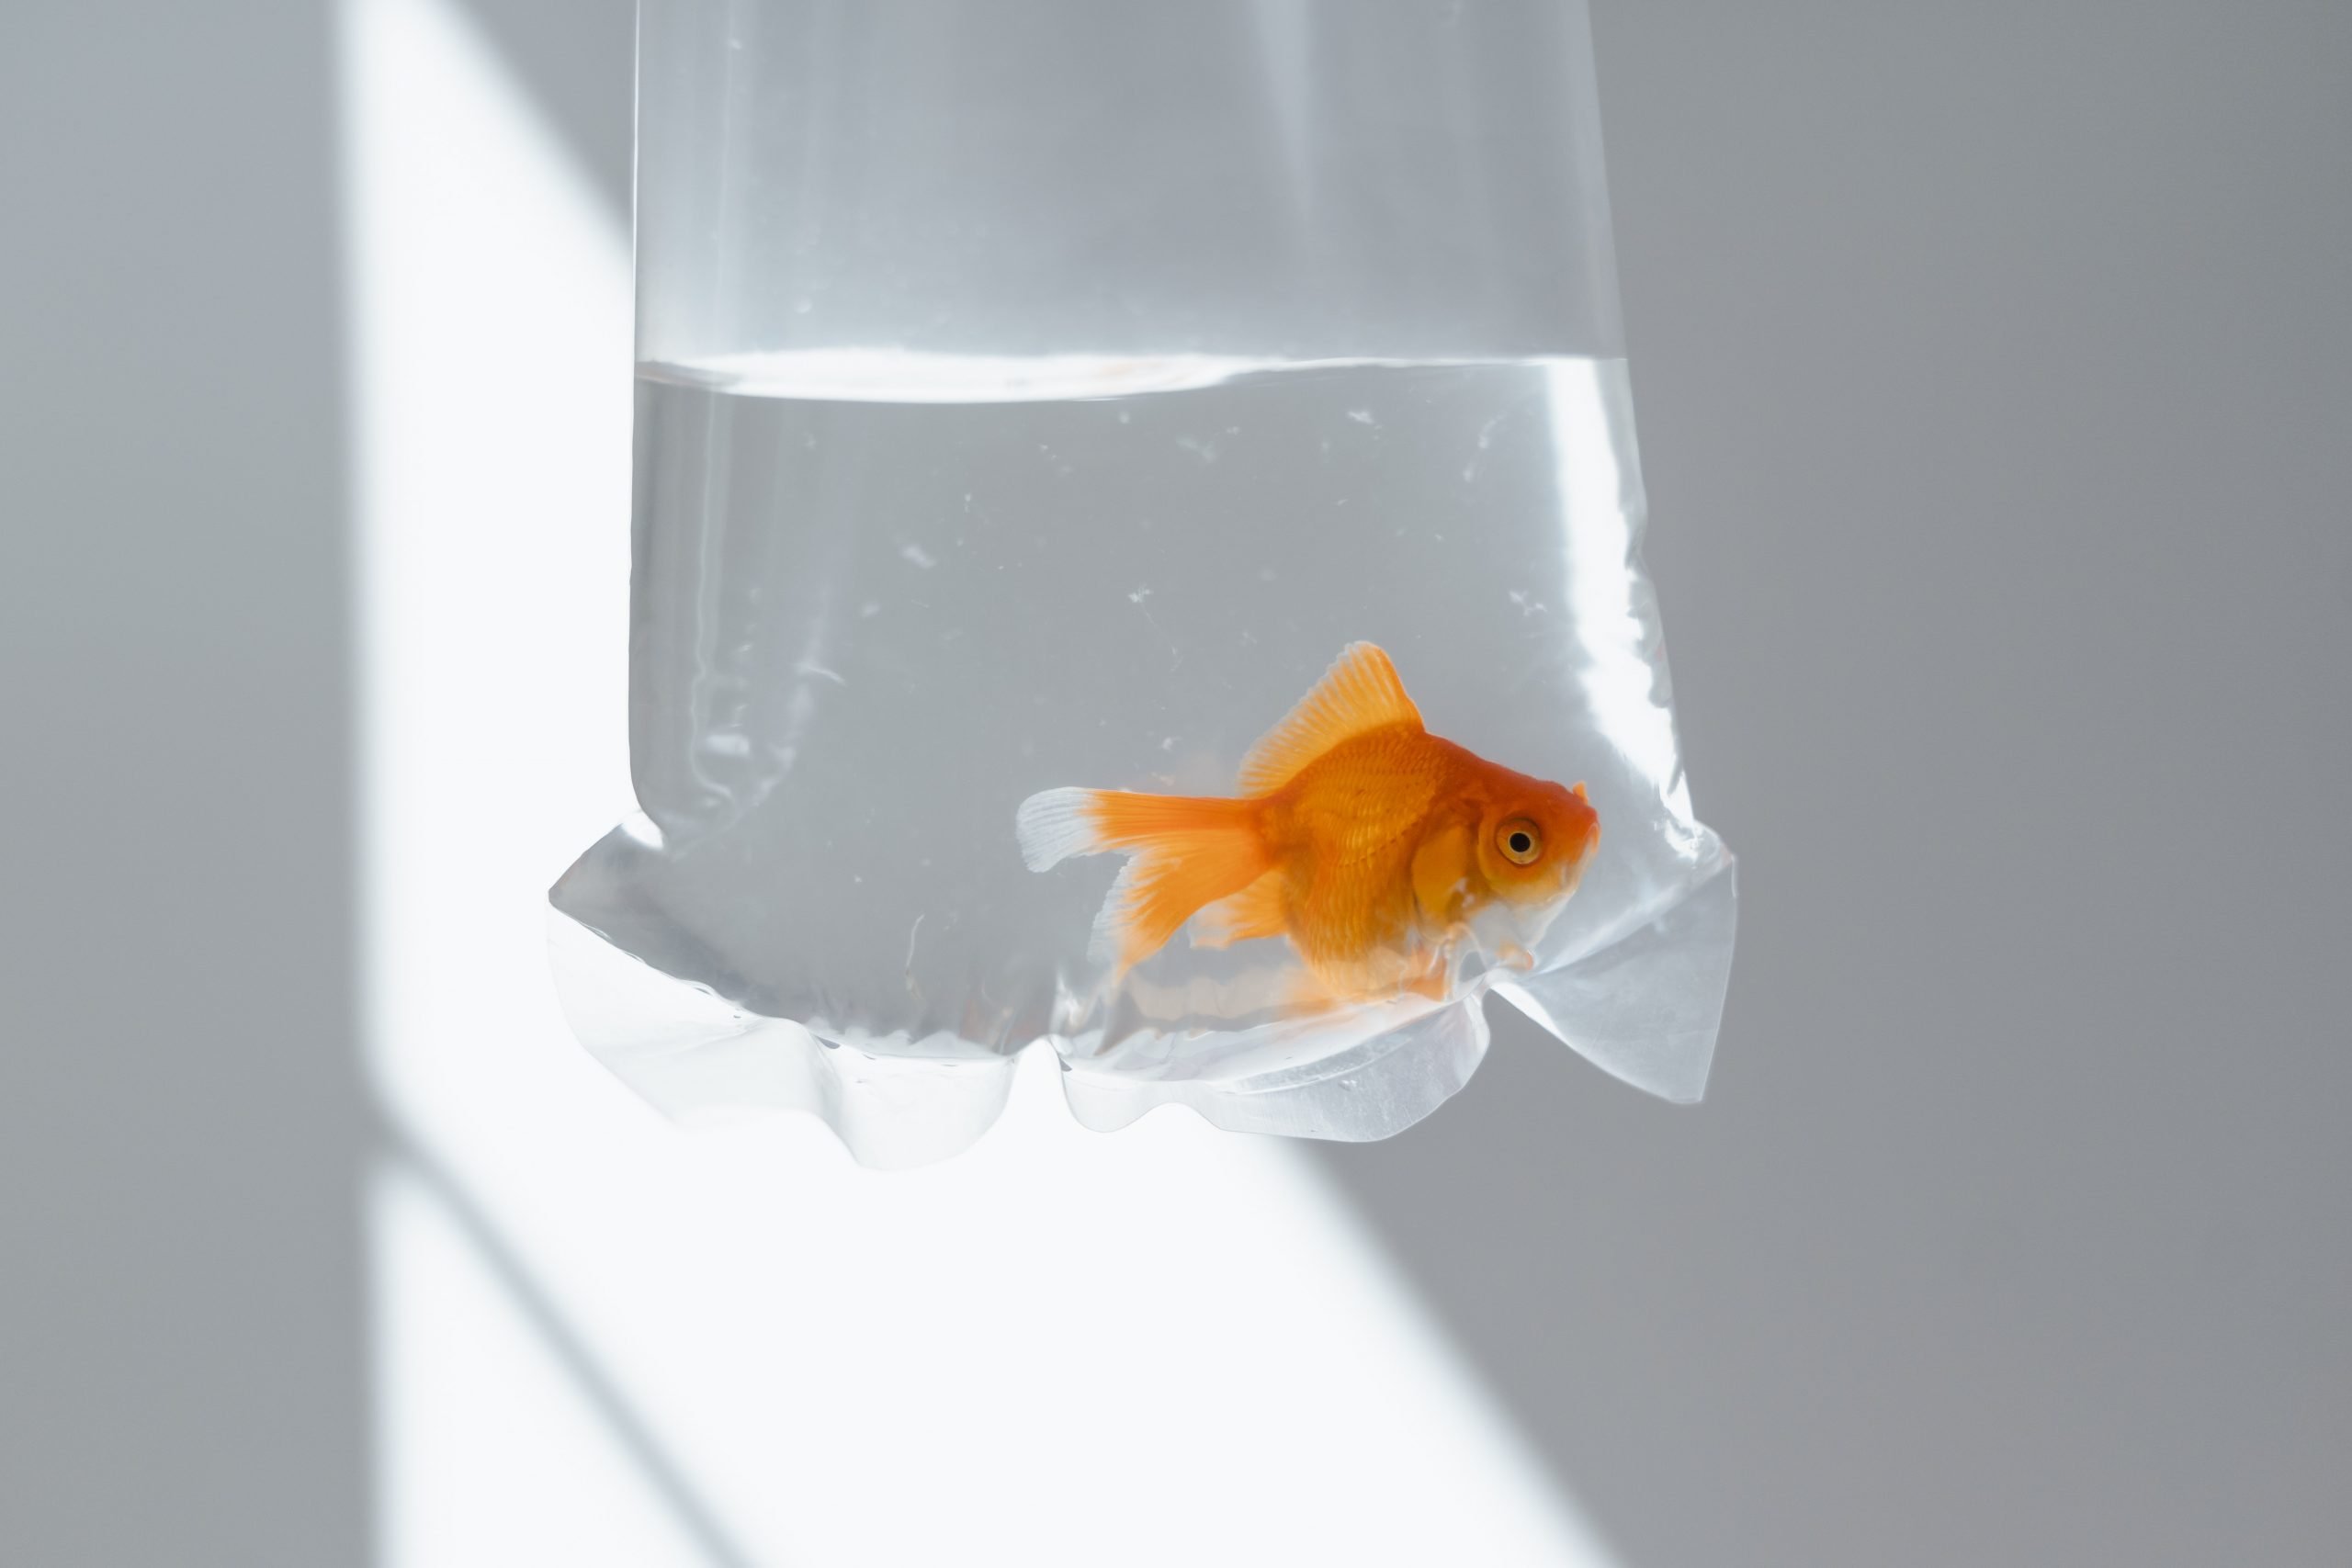 An Artist Trapped Goldfish in IV Bags for a Museum Show in Korea